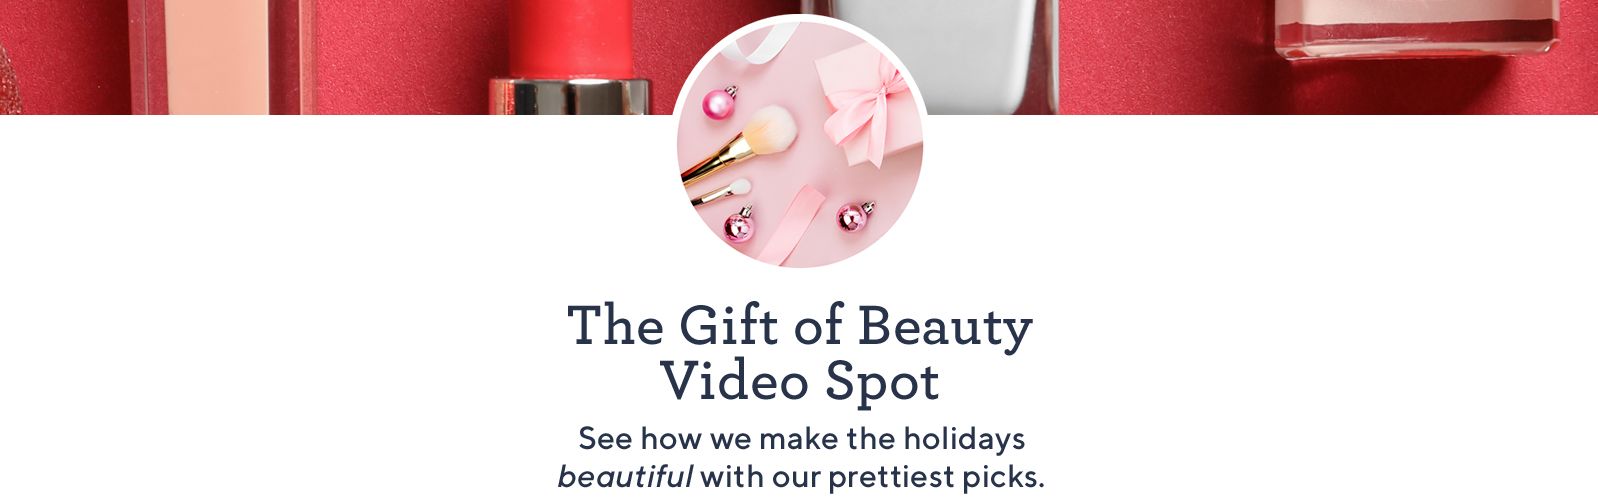 The Gift of Beauty Video Spot.  See how we make the holidays beautiful with our prettiest picks.